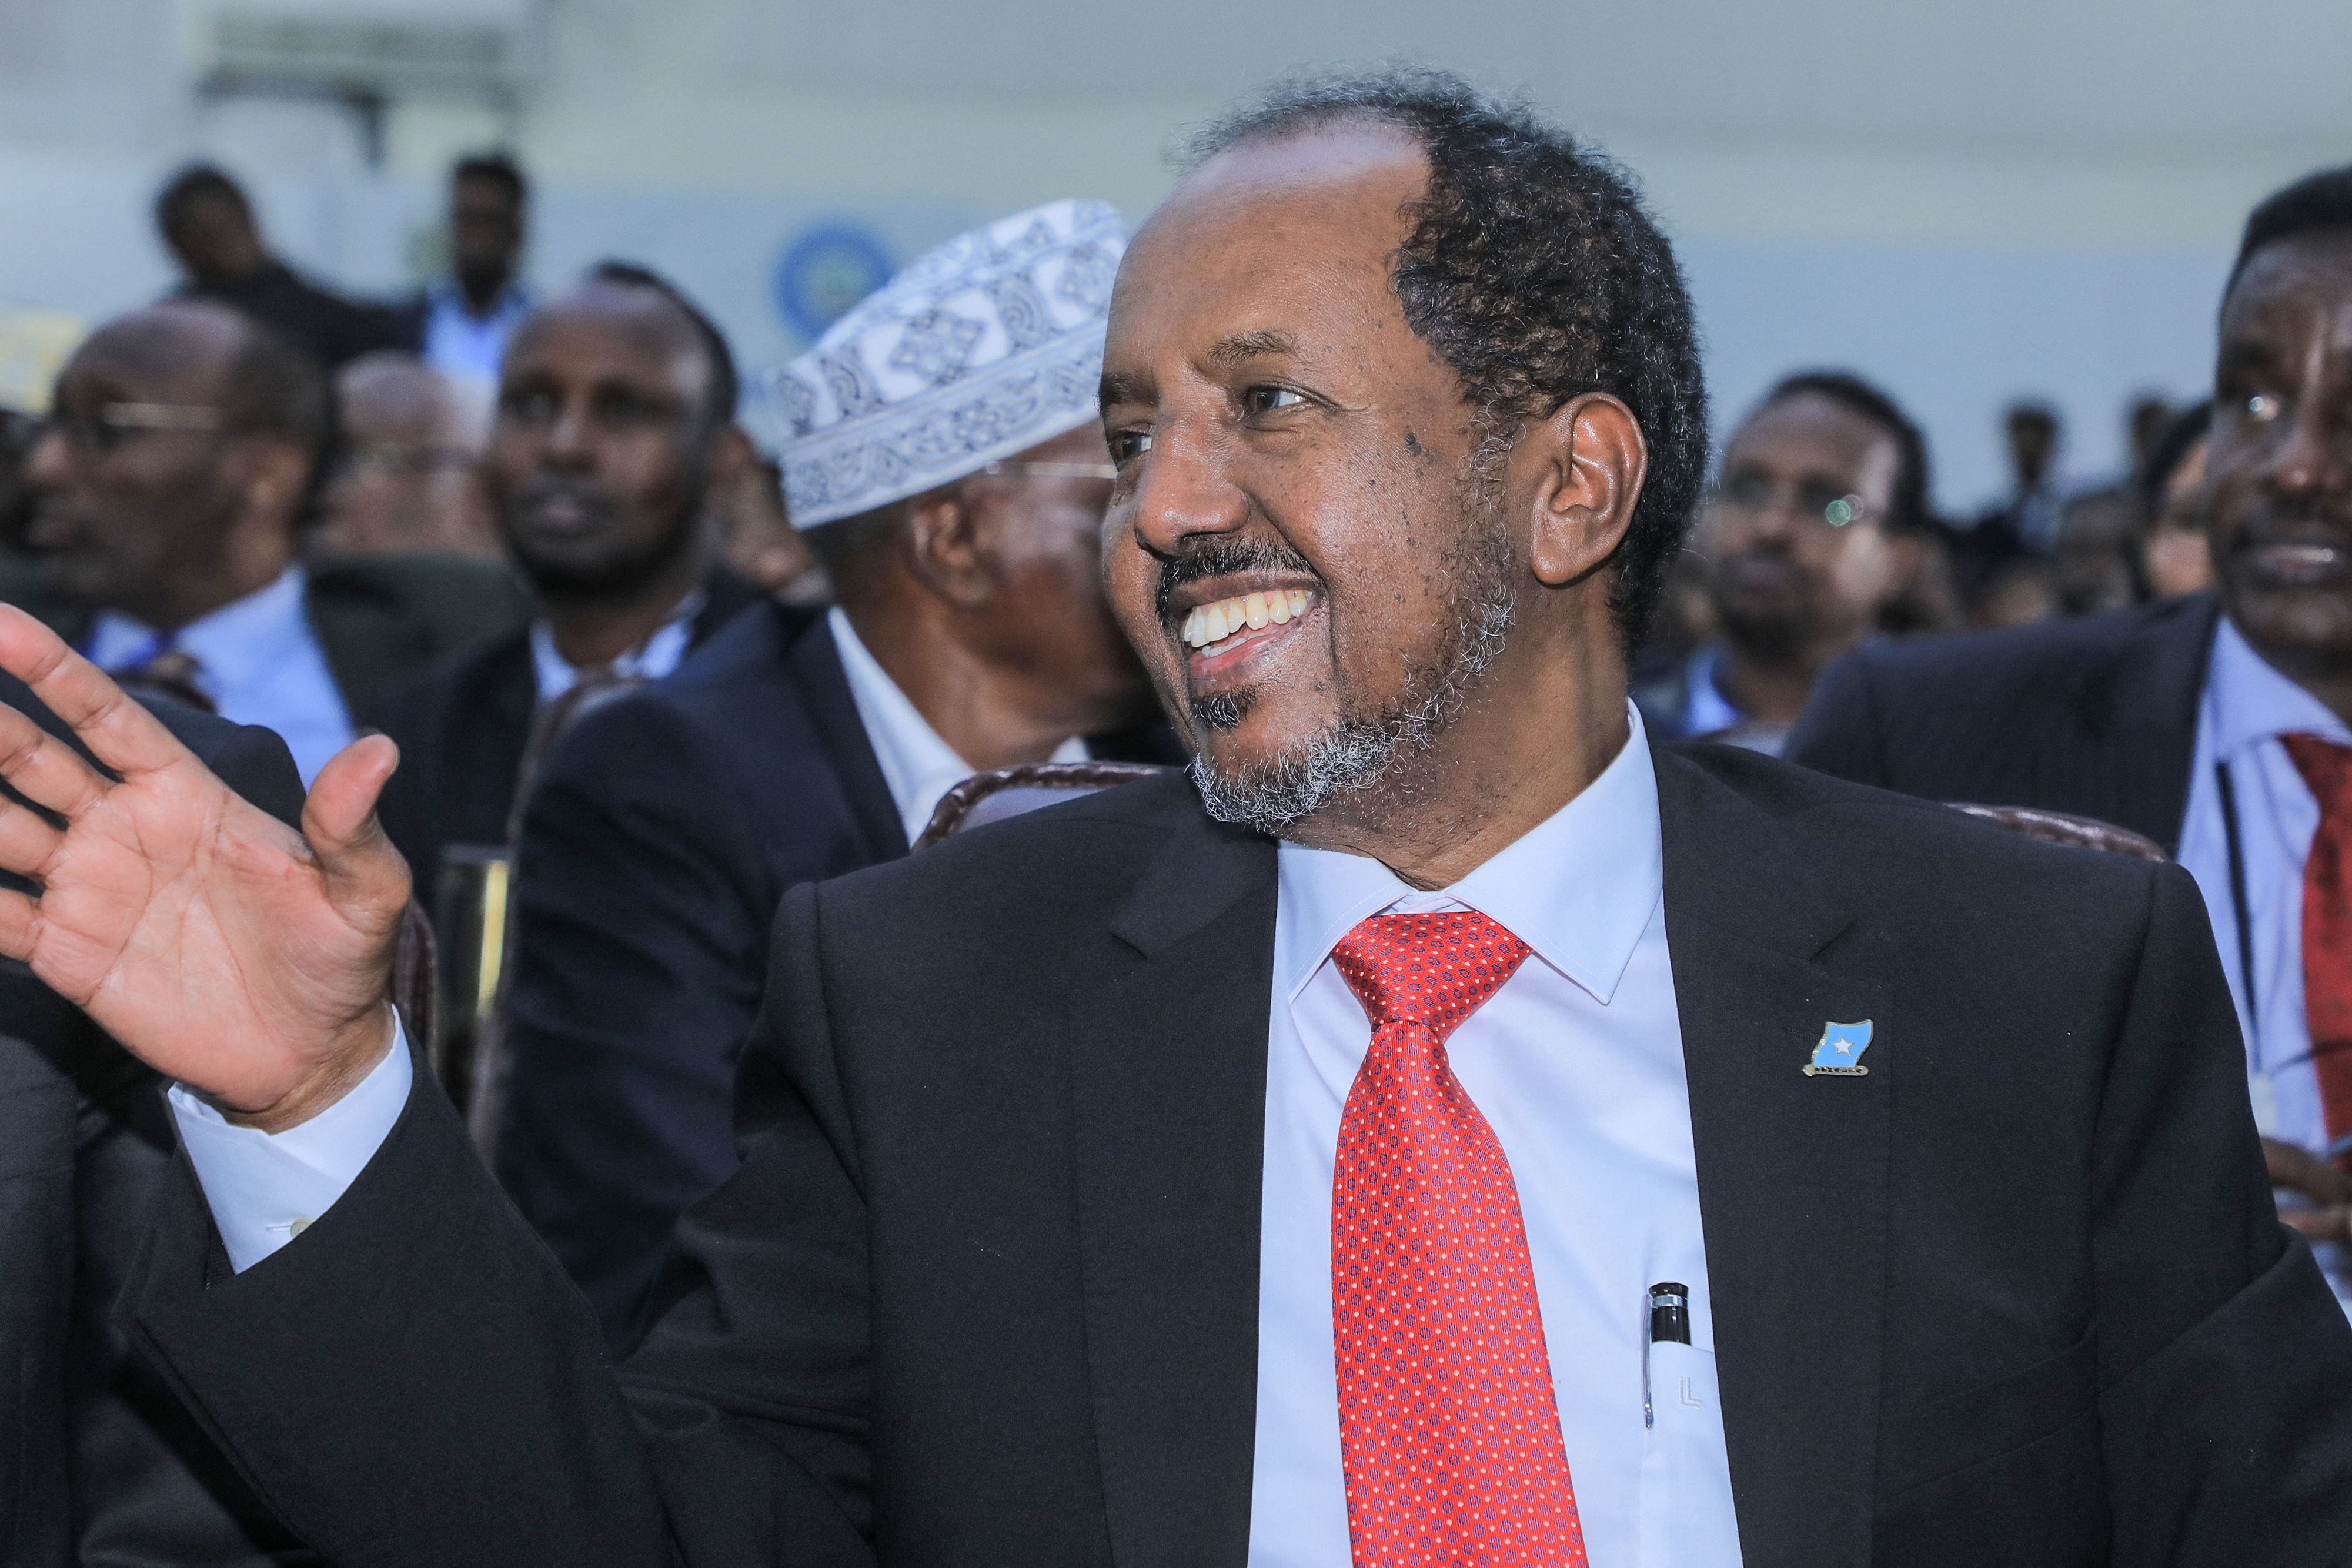 New Somali president Hassan Sheikh Mohamud also governed between 2012 and 2017